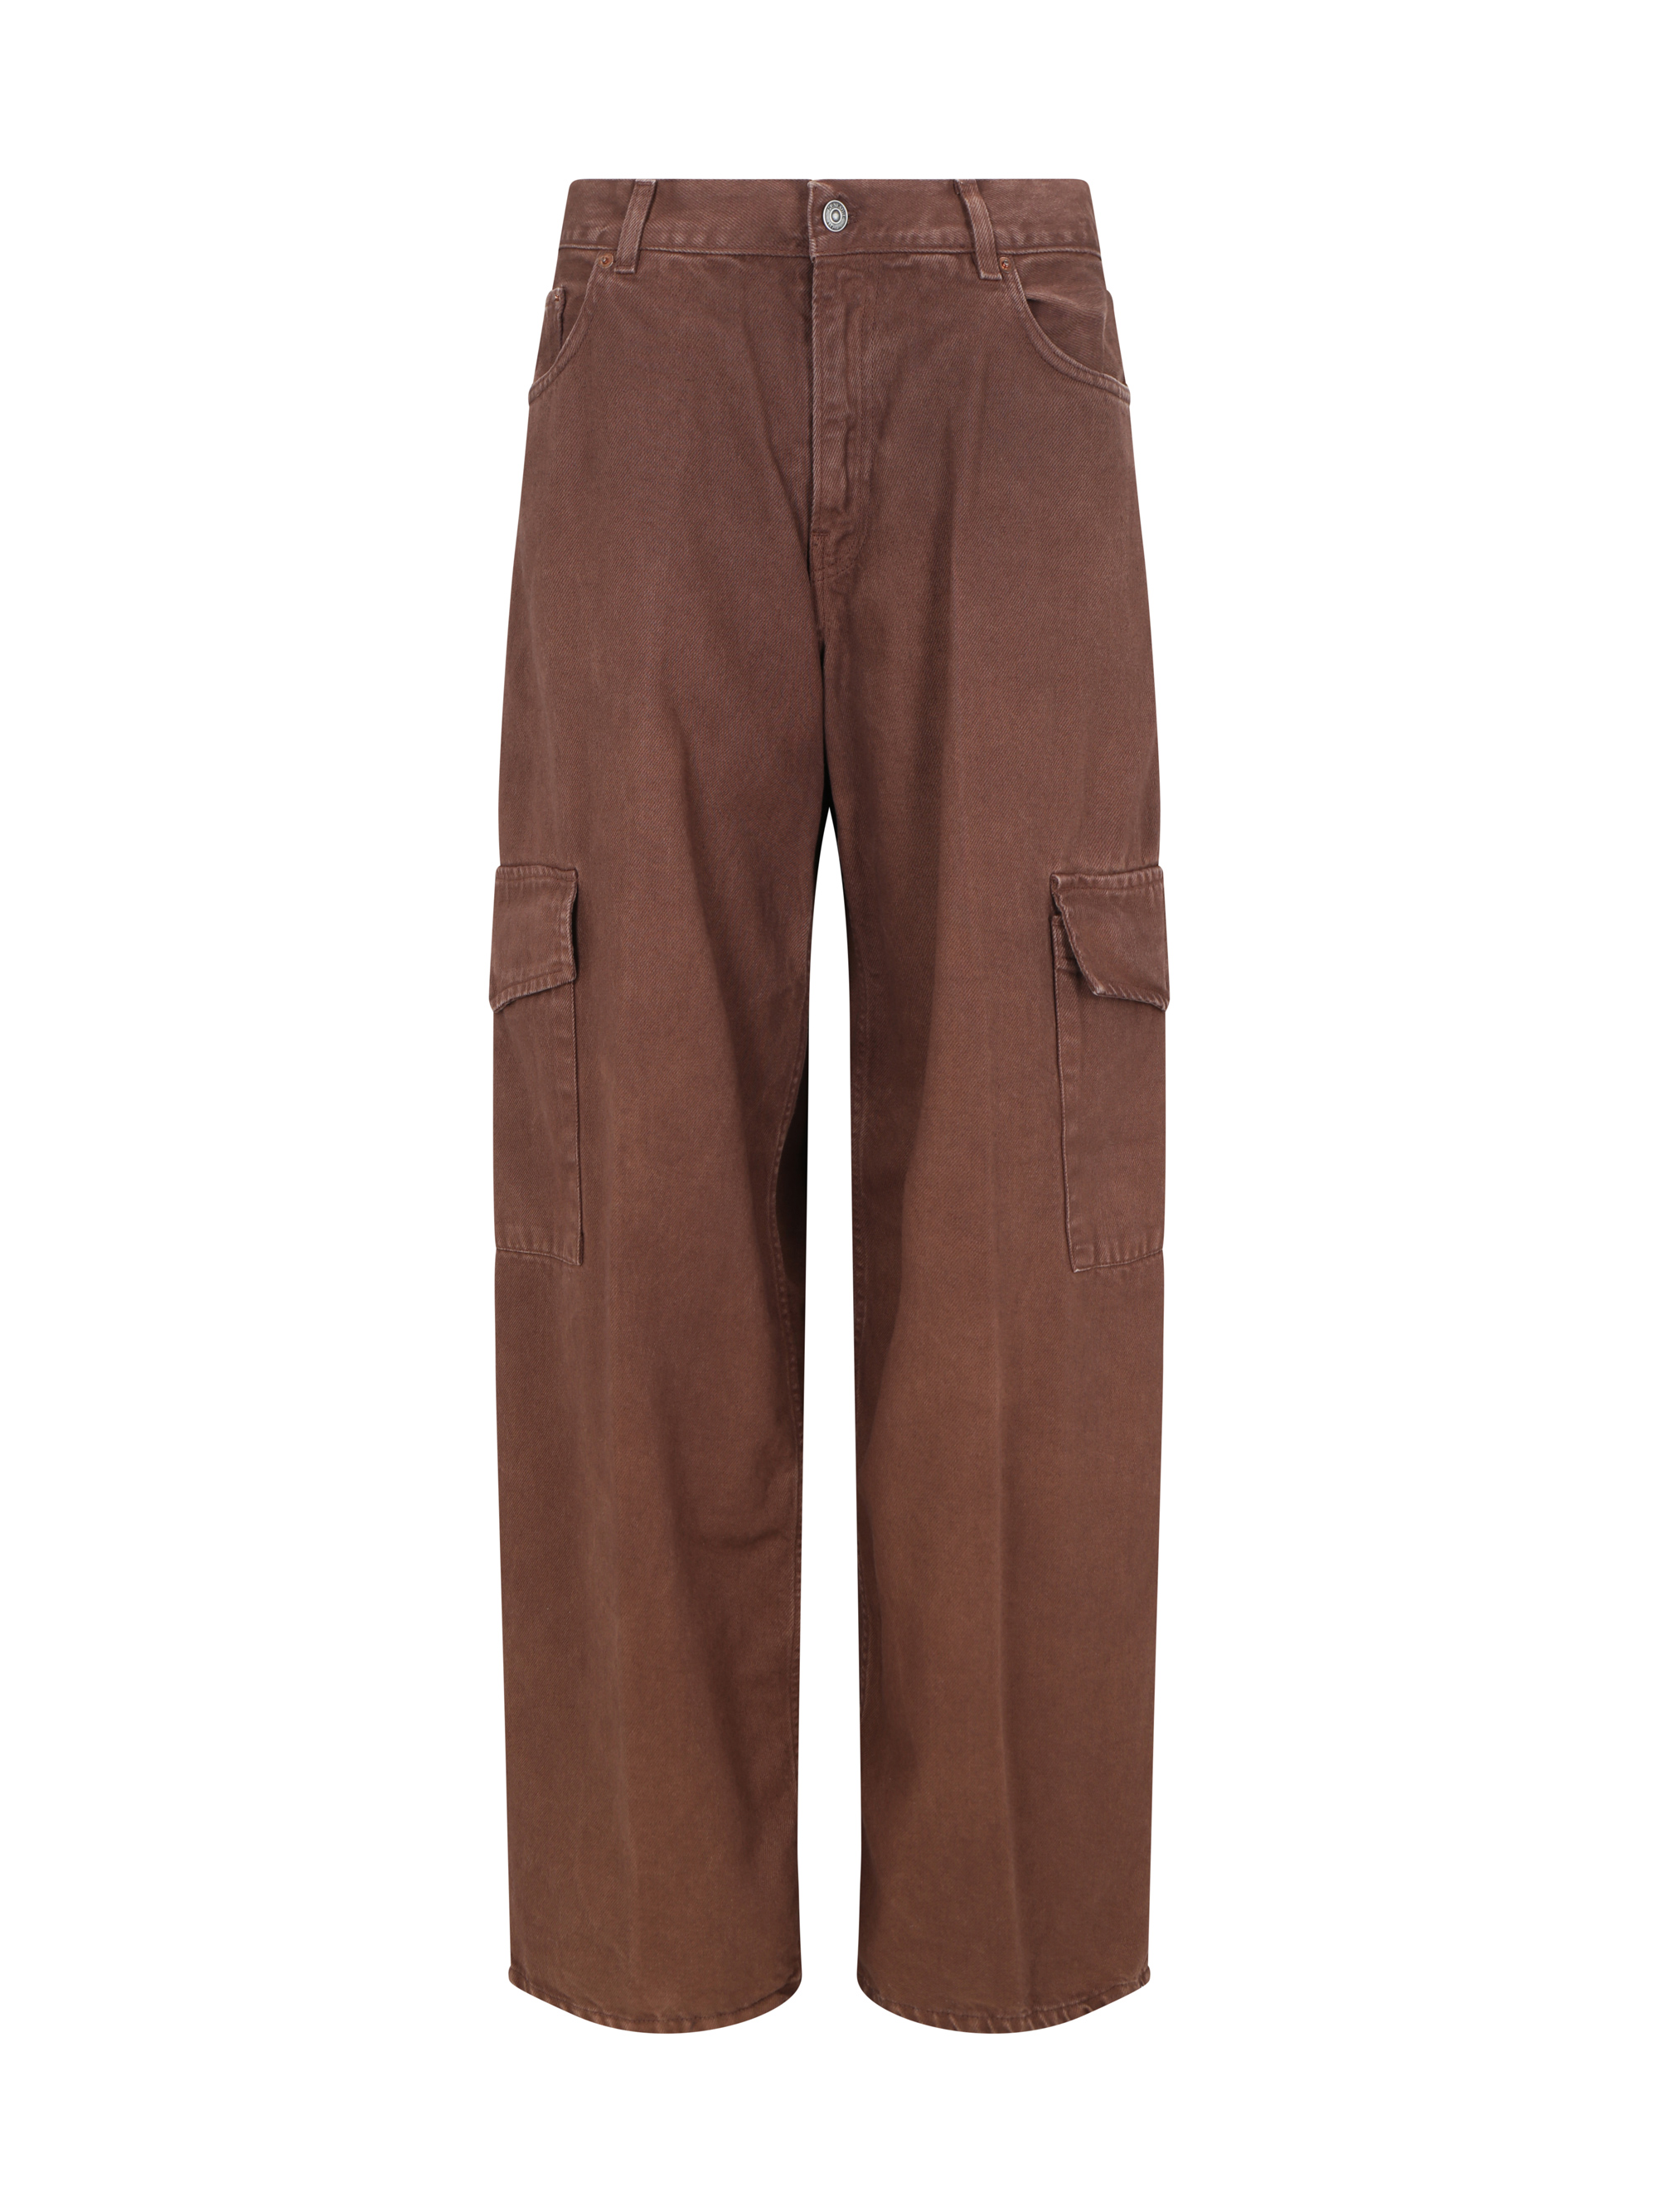 RQYYD Cargo Pants Women Casual Loose High Waisted Straight Leg Baggy Pants  Trousers Lightweight Outdoor Travel Pants with Pockets(Brown,M) -  Walmart.com